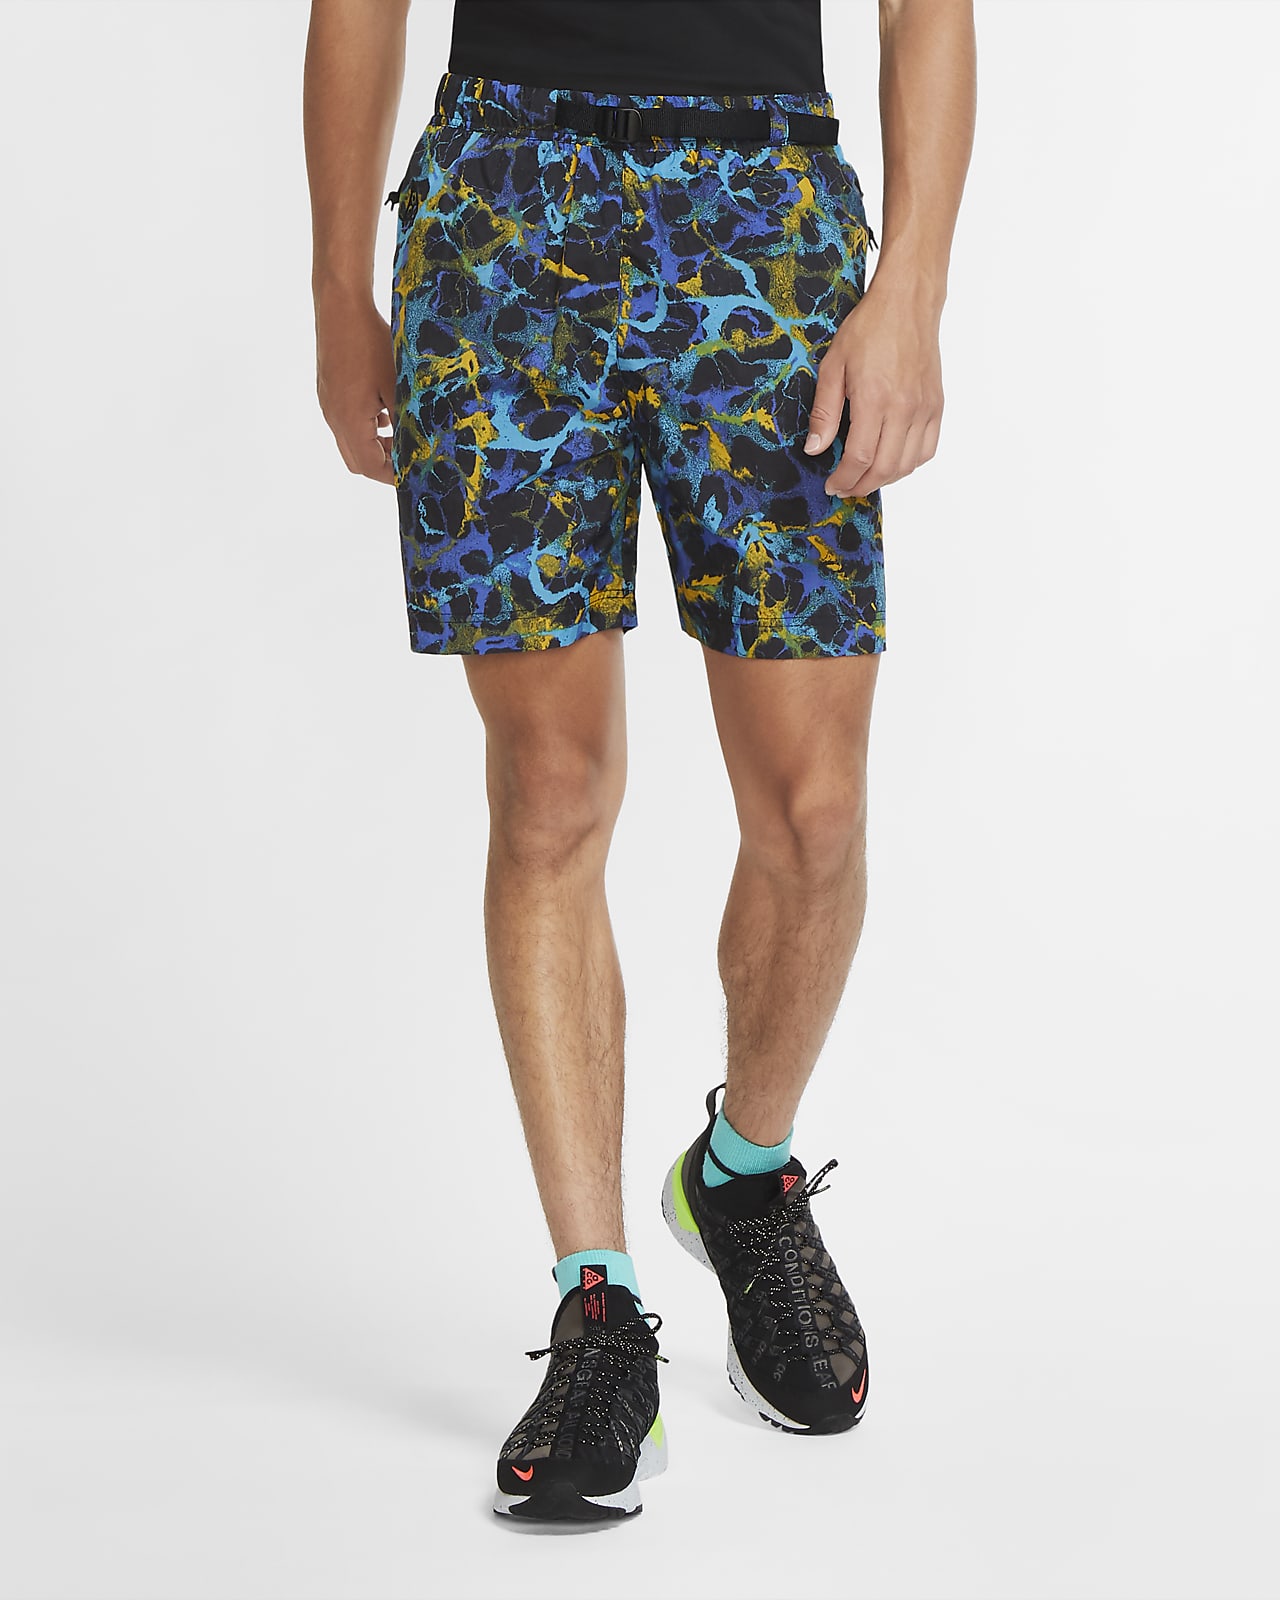 converse printed quick dry short